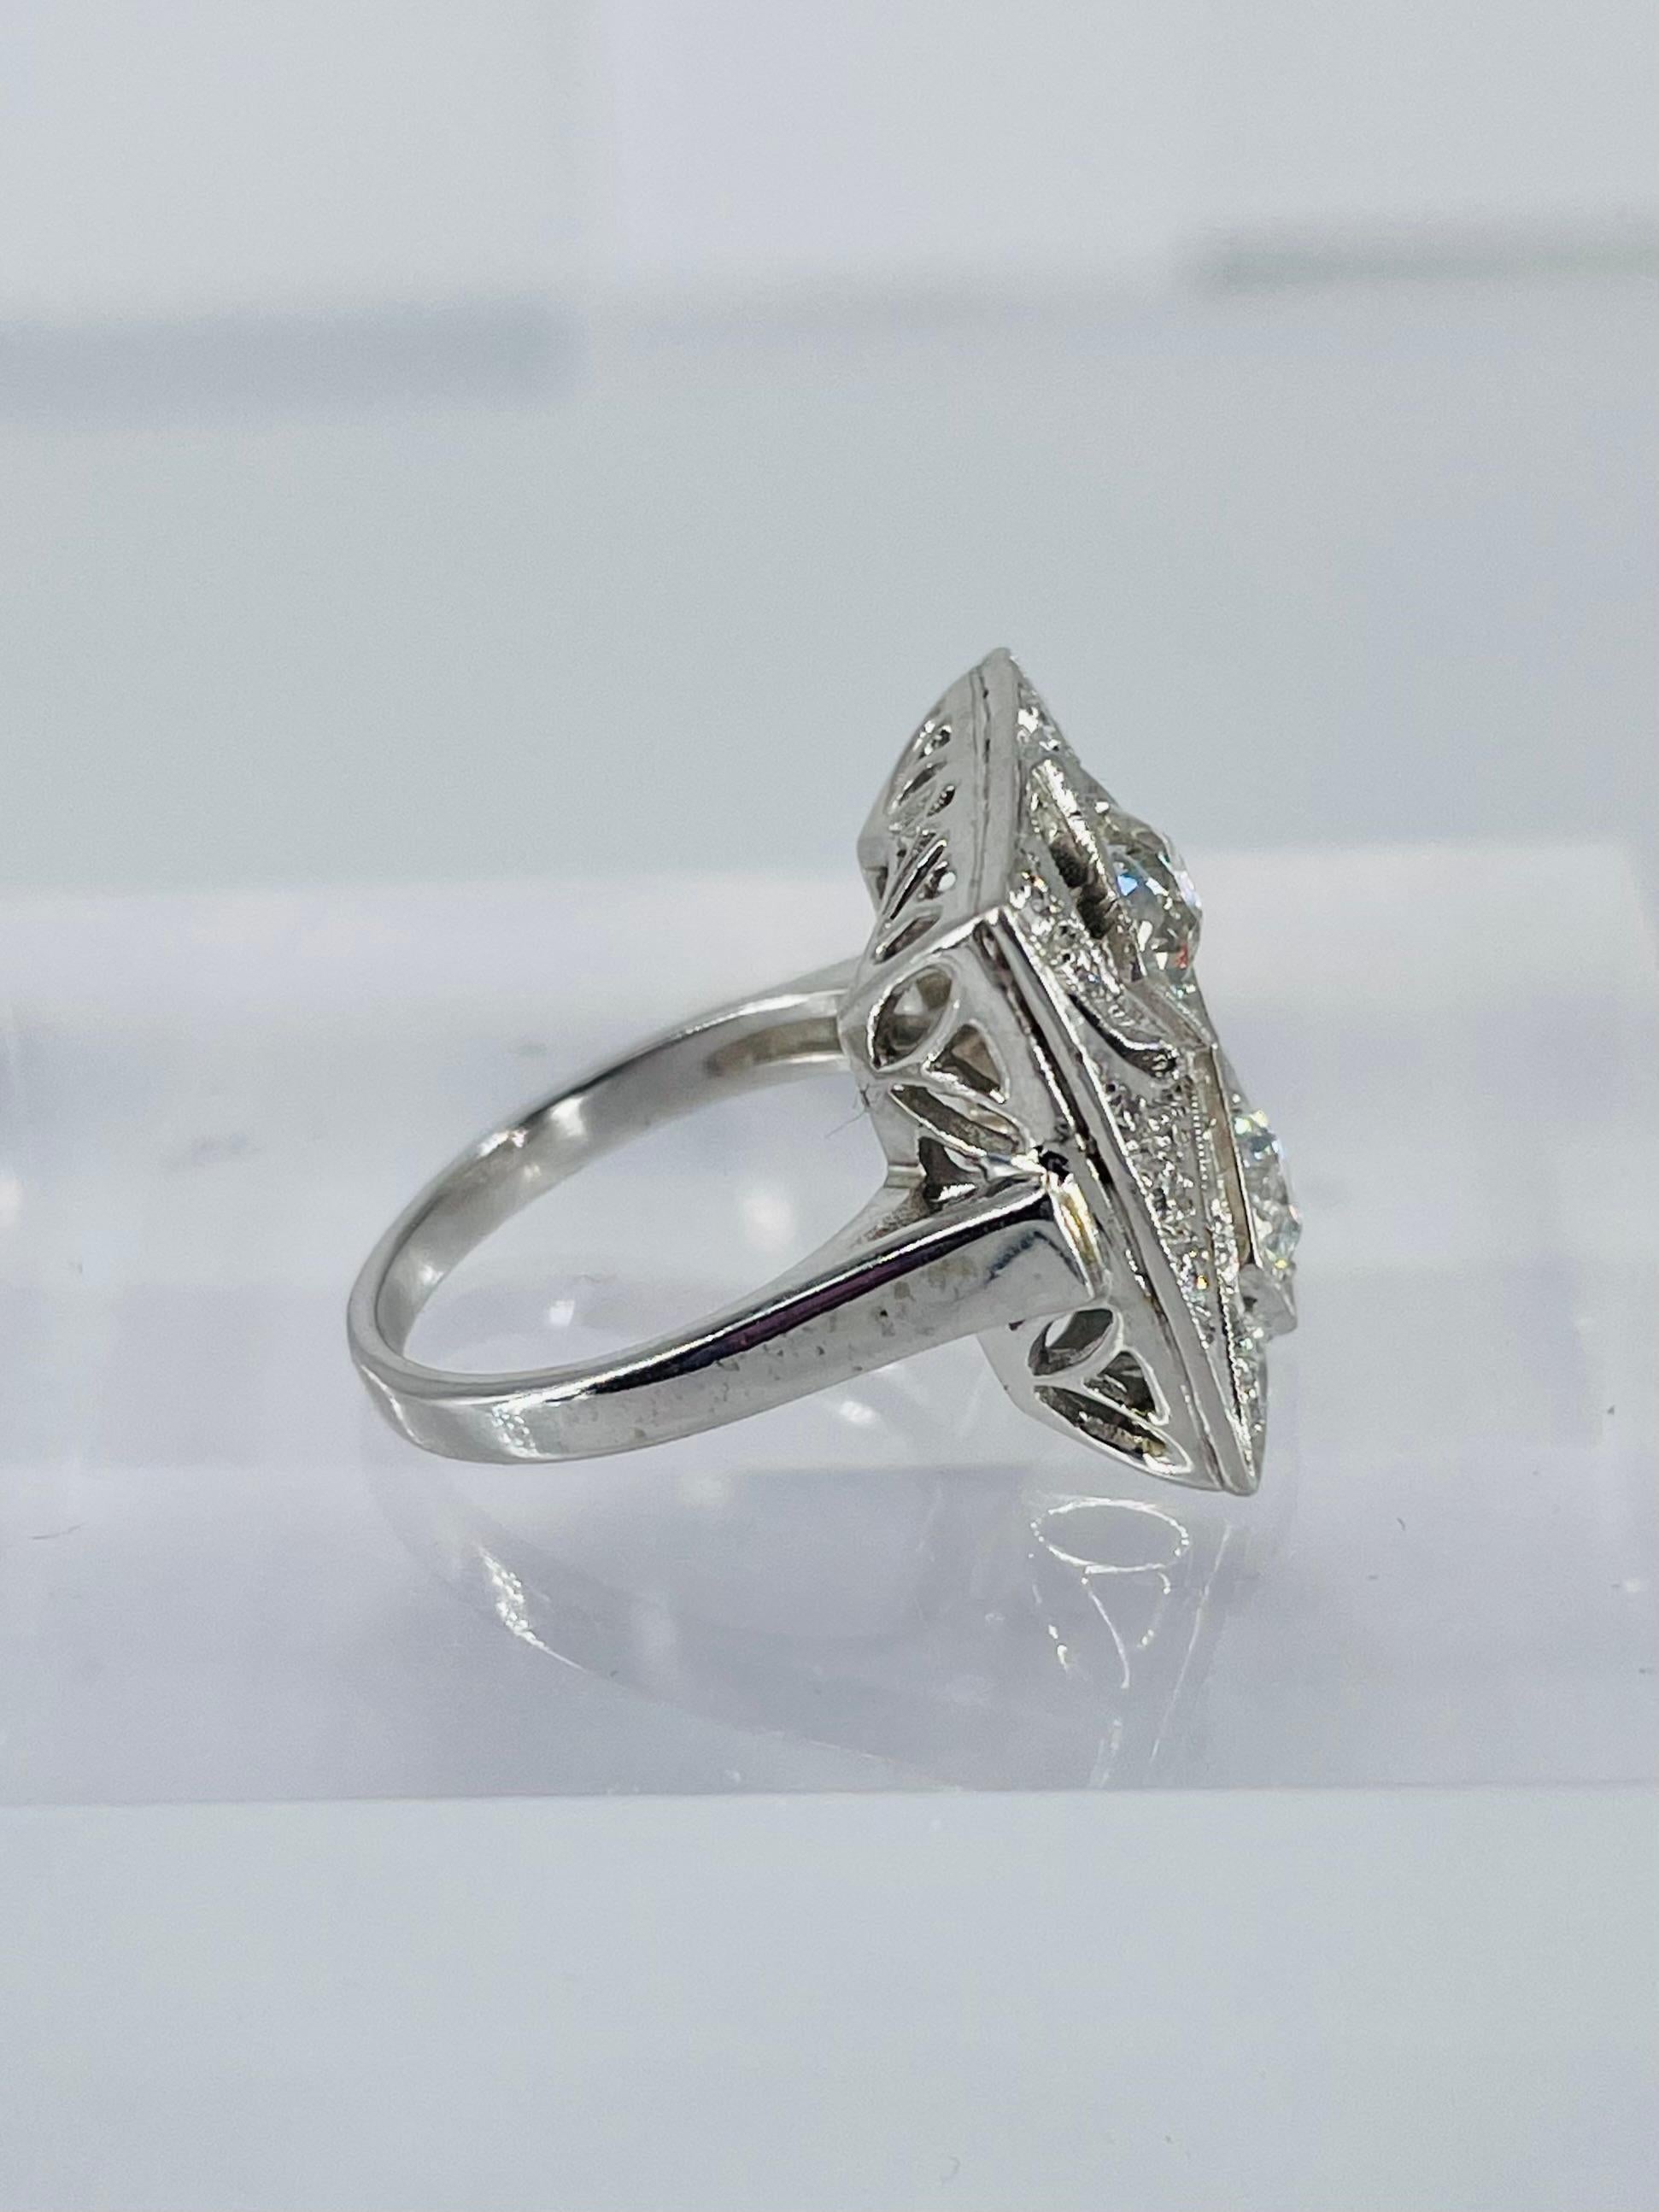 This exquisite antique from the J. Birnbach vault is a one of a kind statement piece. The ring showcases two European cut diamonds, total 1.00 carat, which were cut in the early 1900s. 
The setting was crafted in the 1950s. It is 14K white gold with